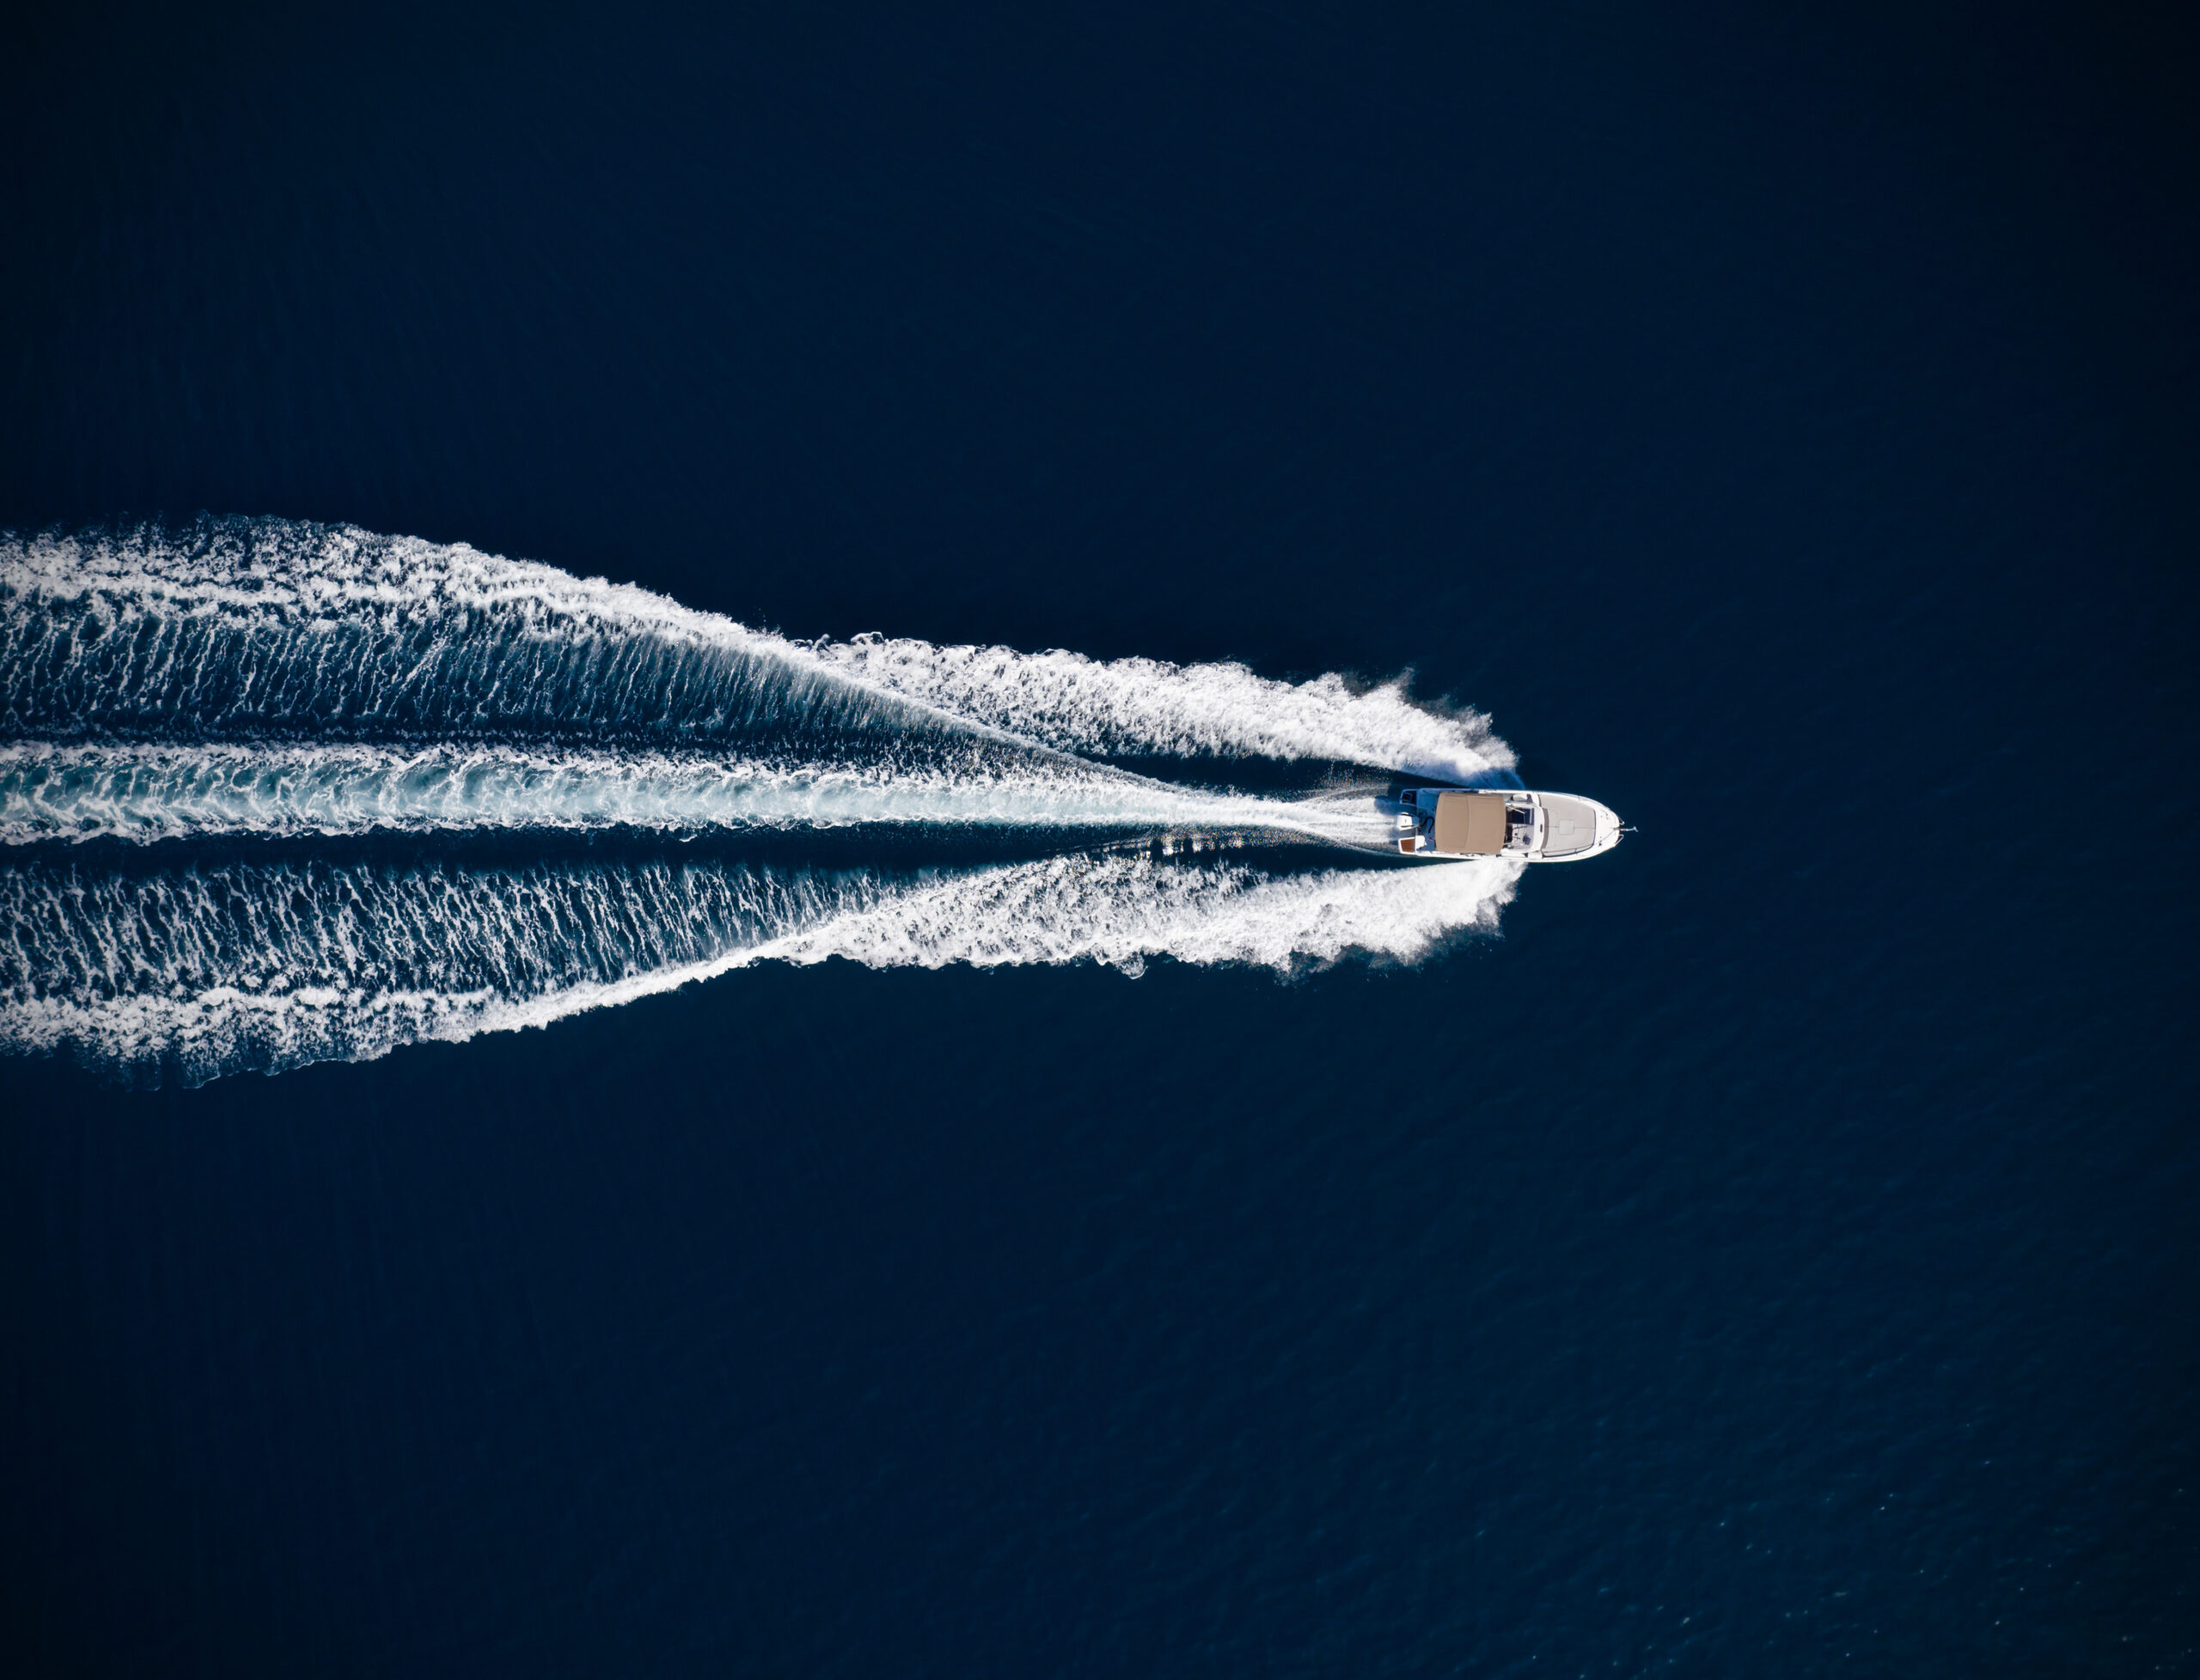 Aerial view of speed motor boat on open sea.